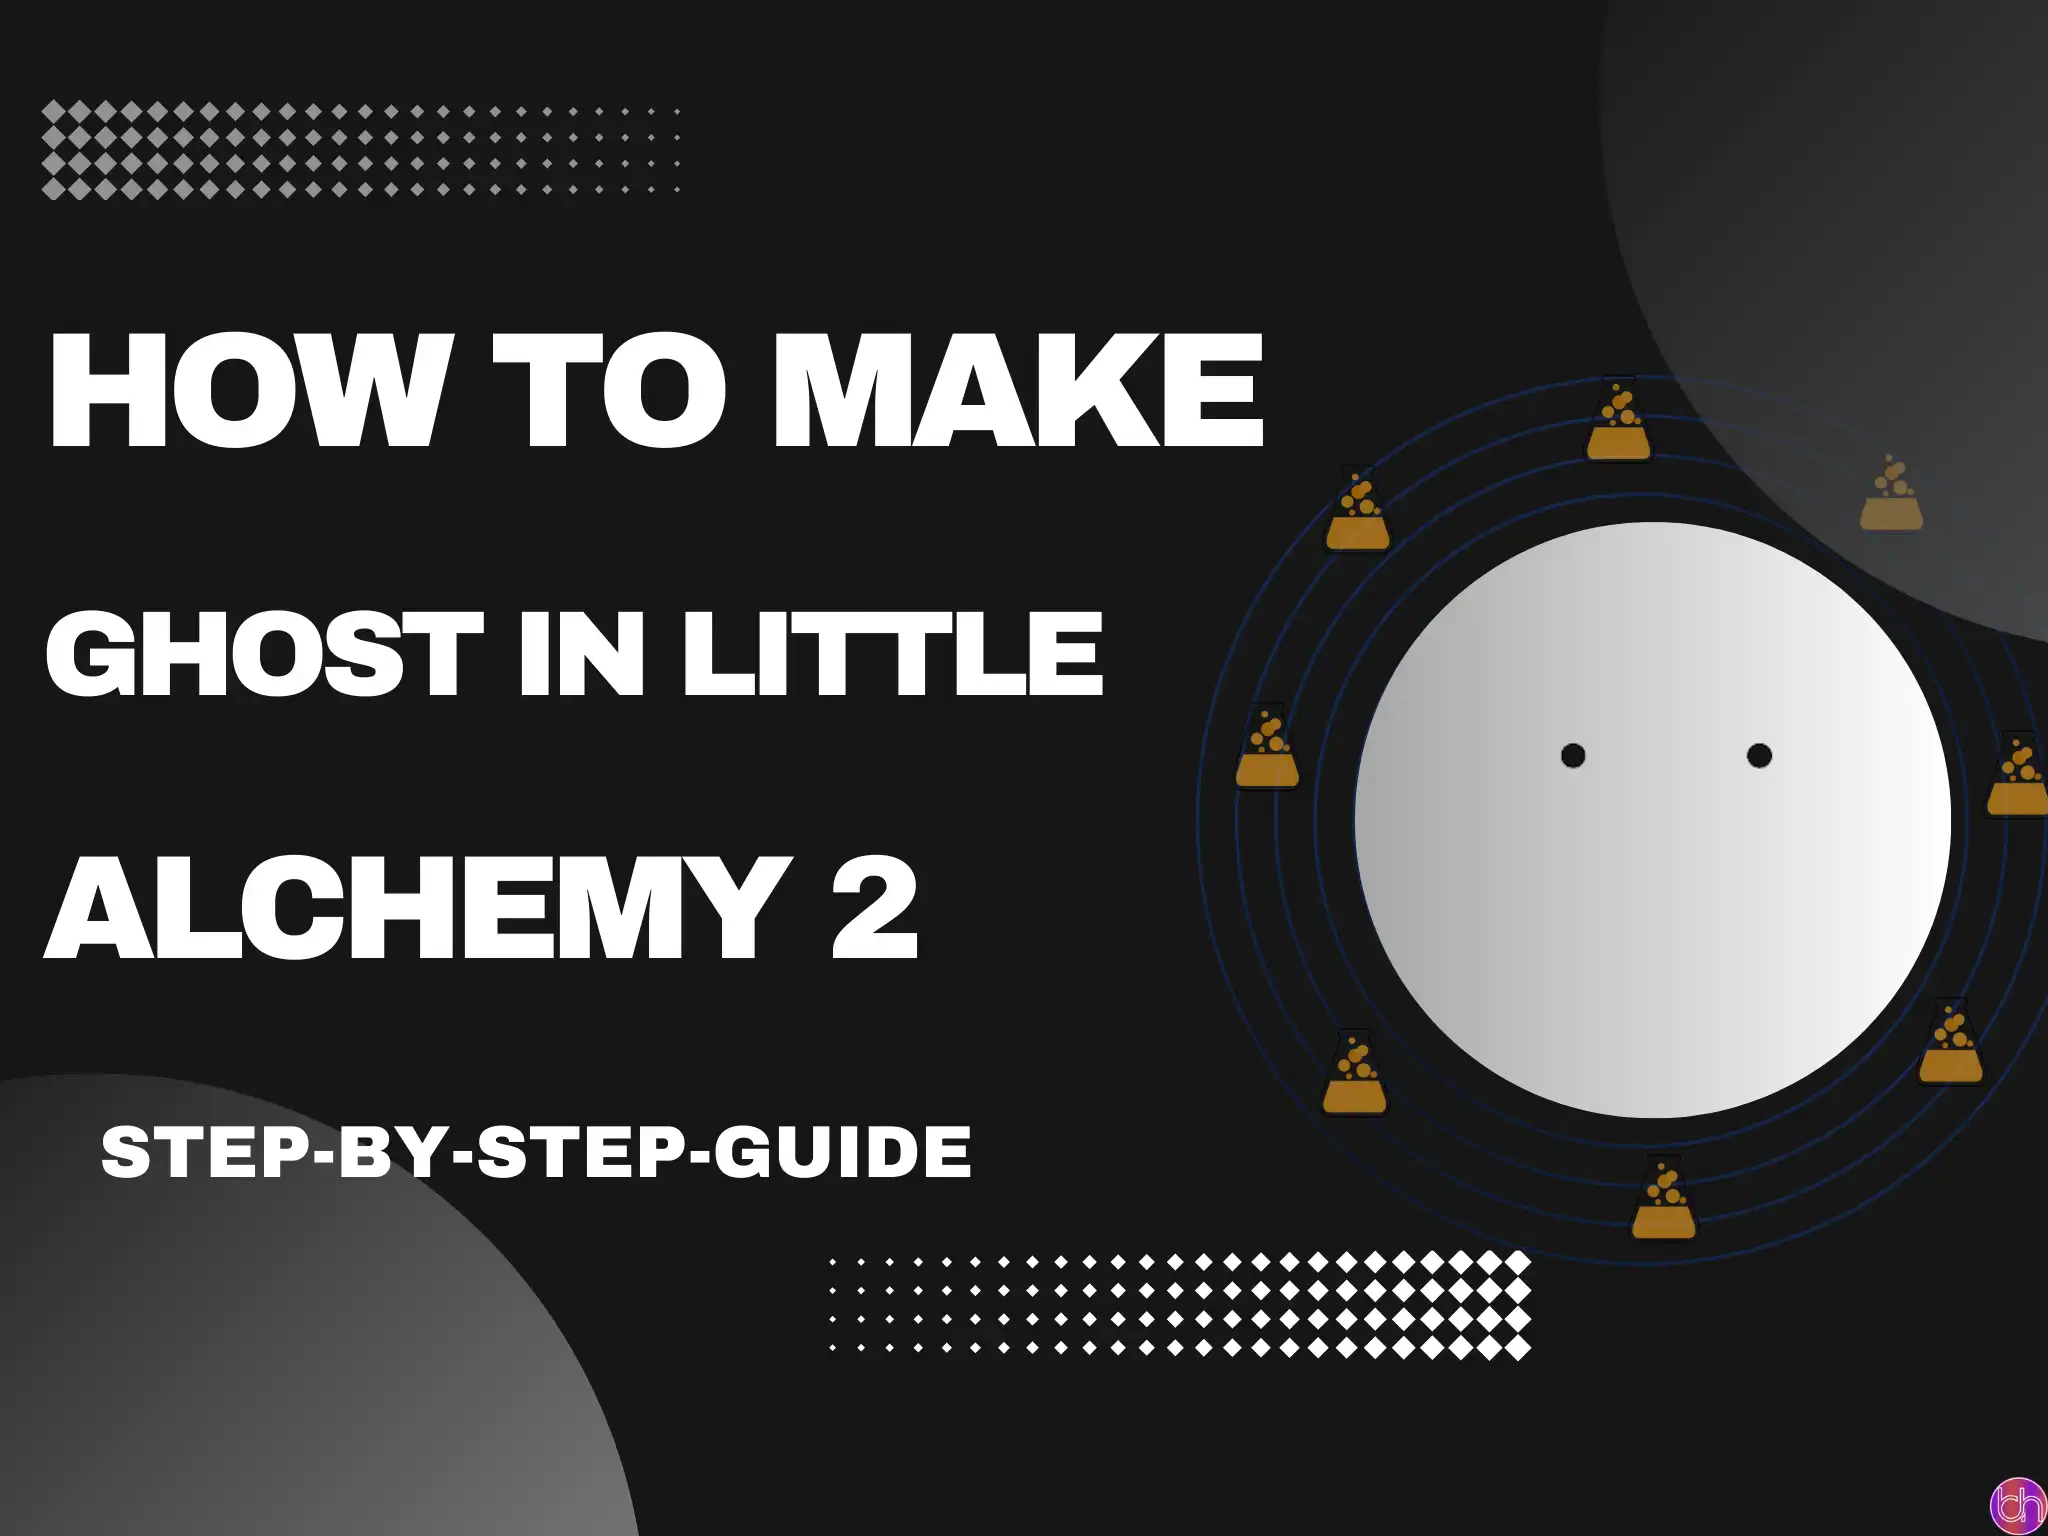 How to make Ghost in Little Alchemy 2